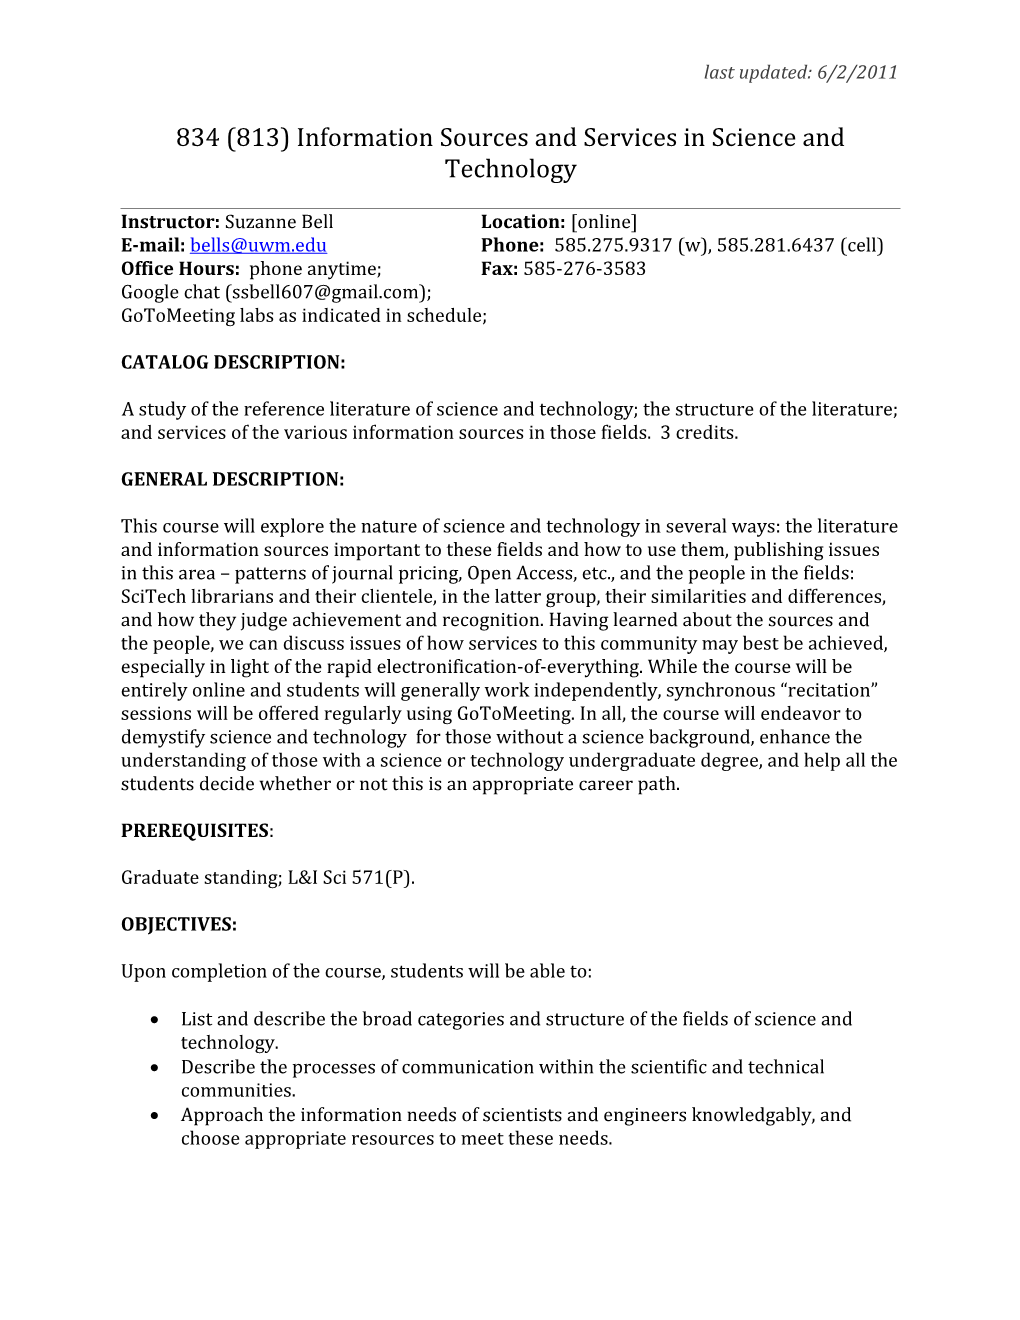 LIS 834 Source/Servs Science & Technologylast Updated: 6/2/2011